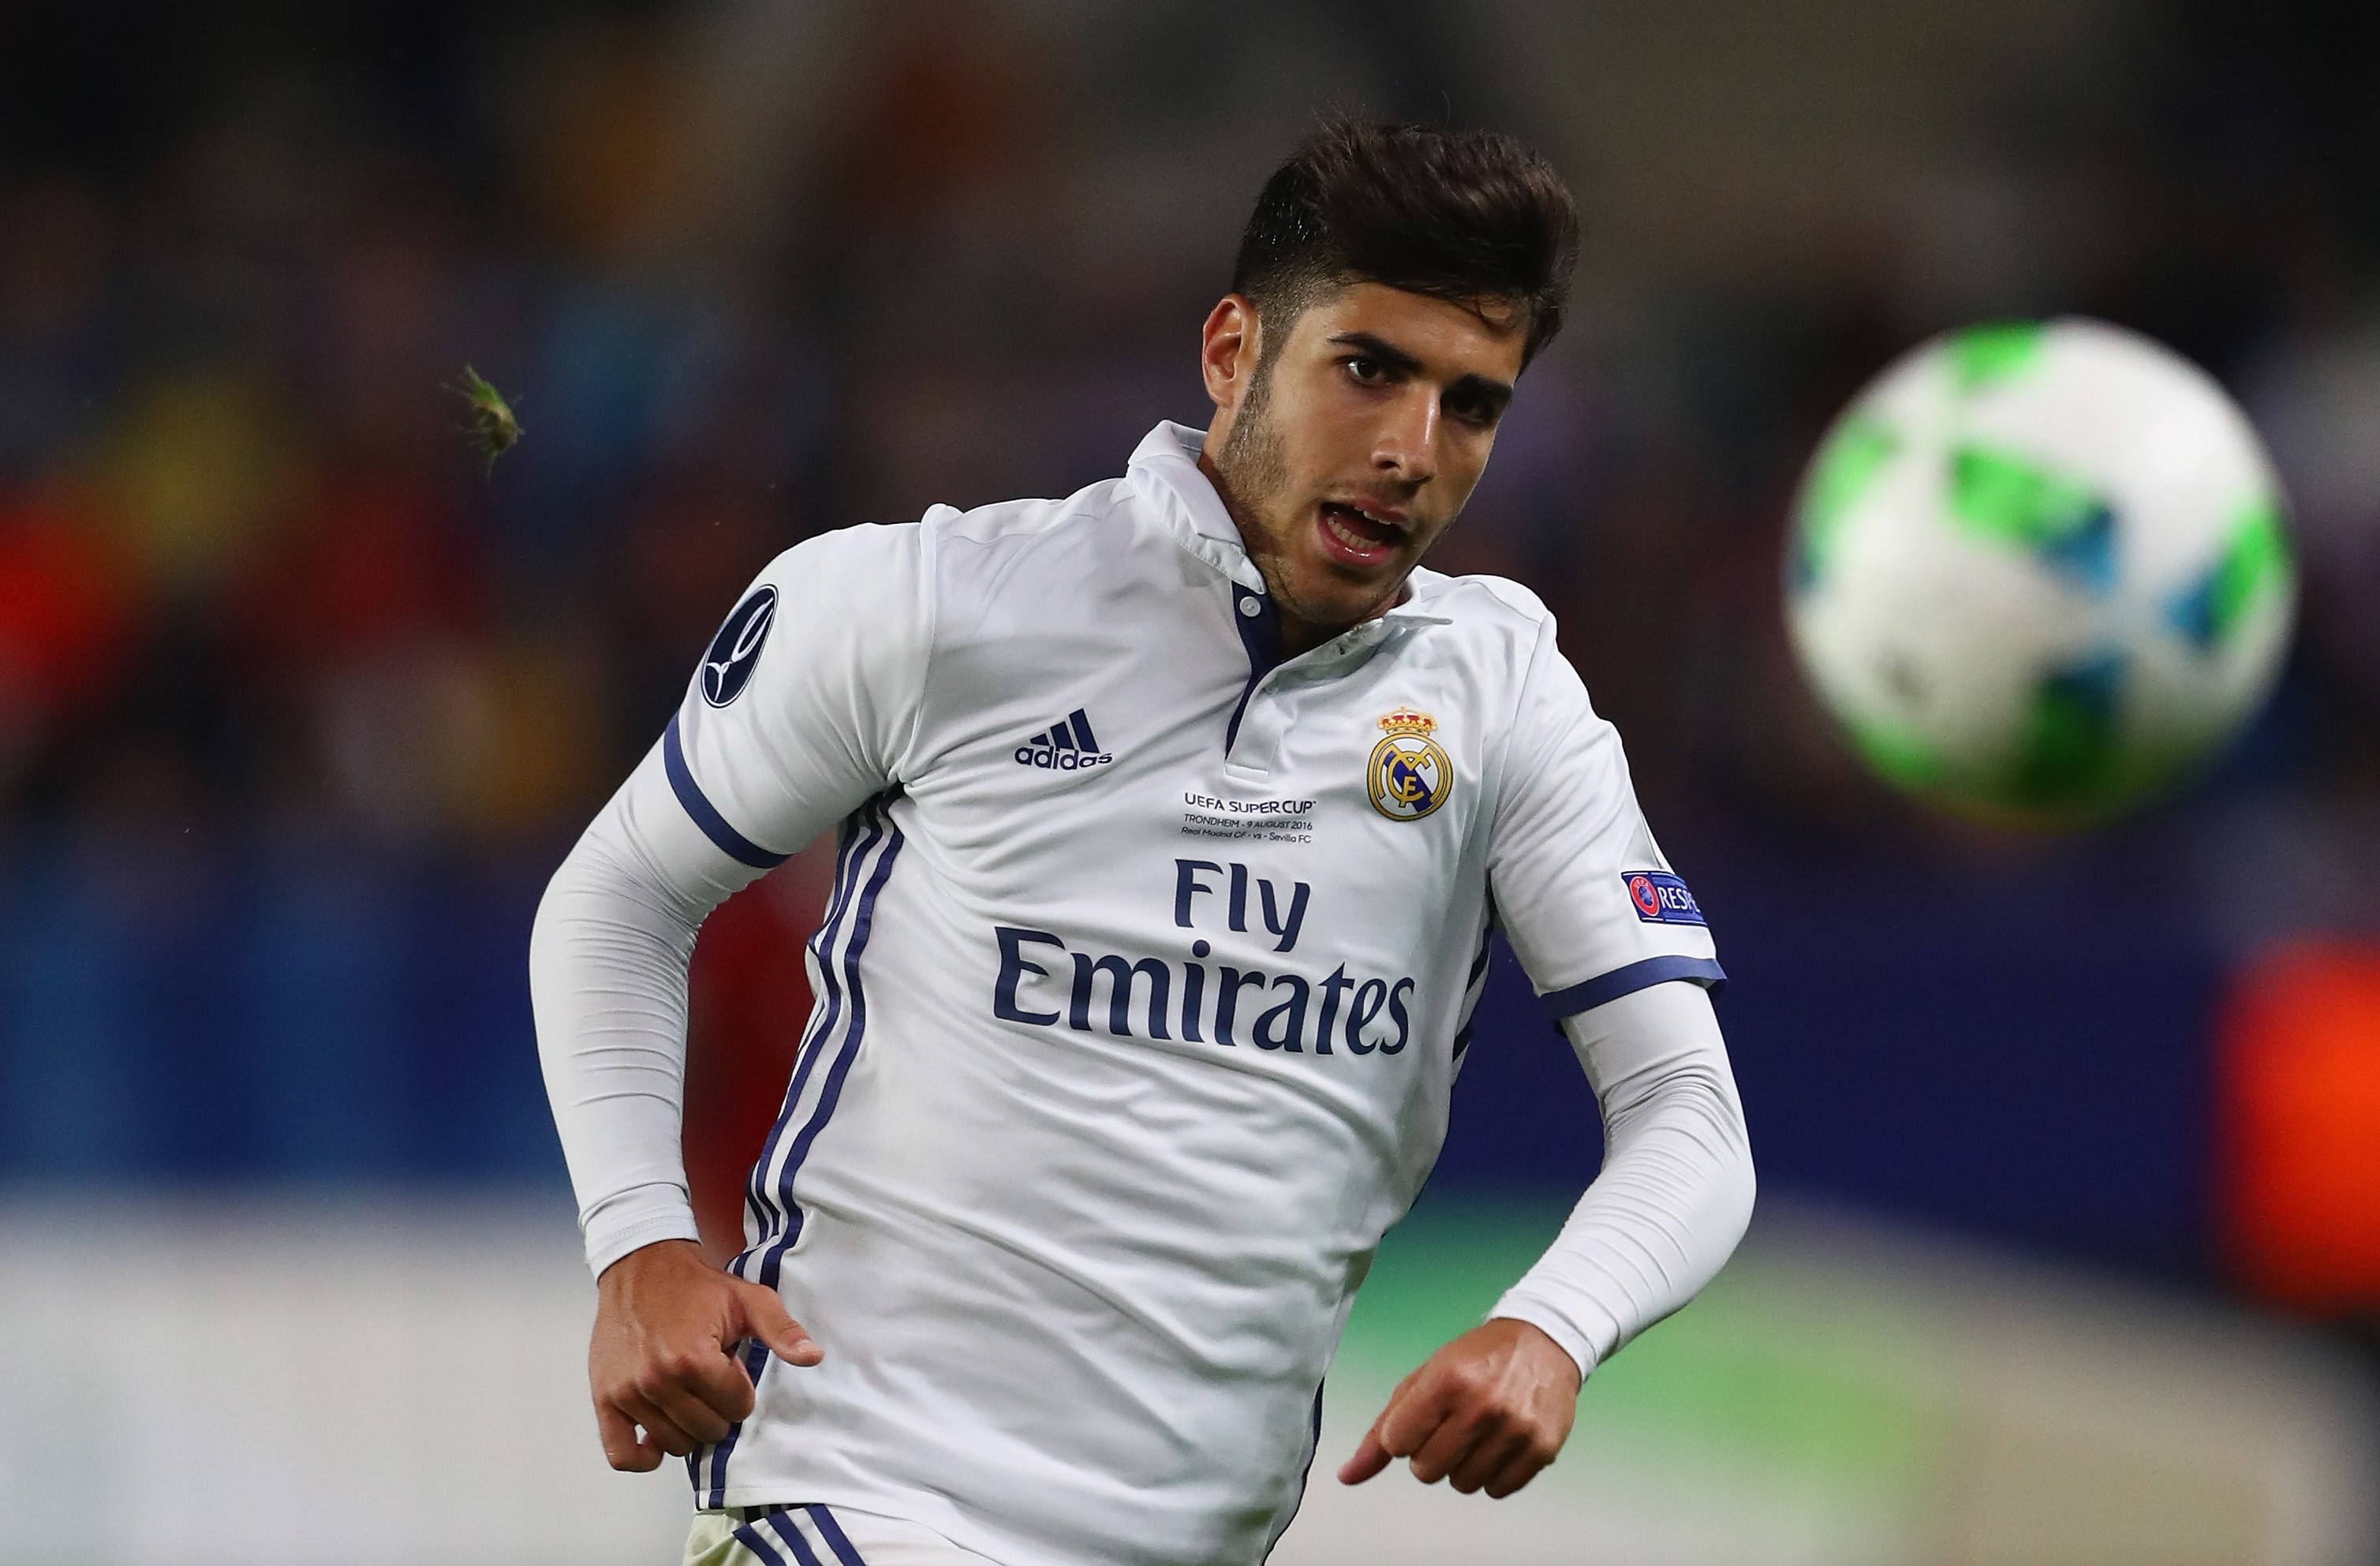 Exclusive: Contact between AC Milan and Real Madrid; Mirabelli likes Asensio